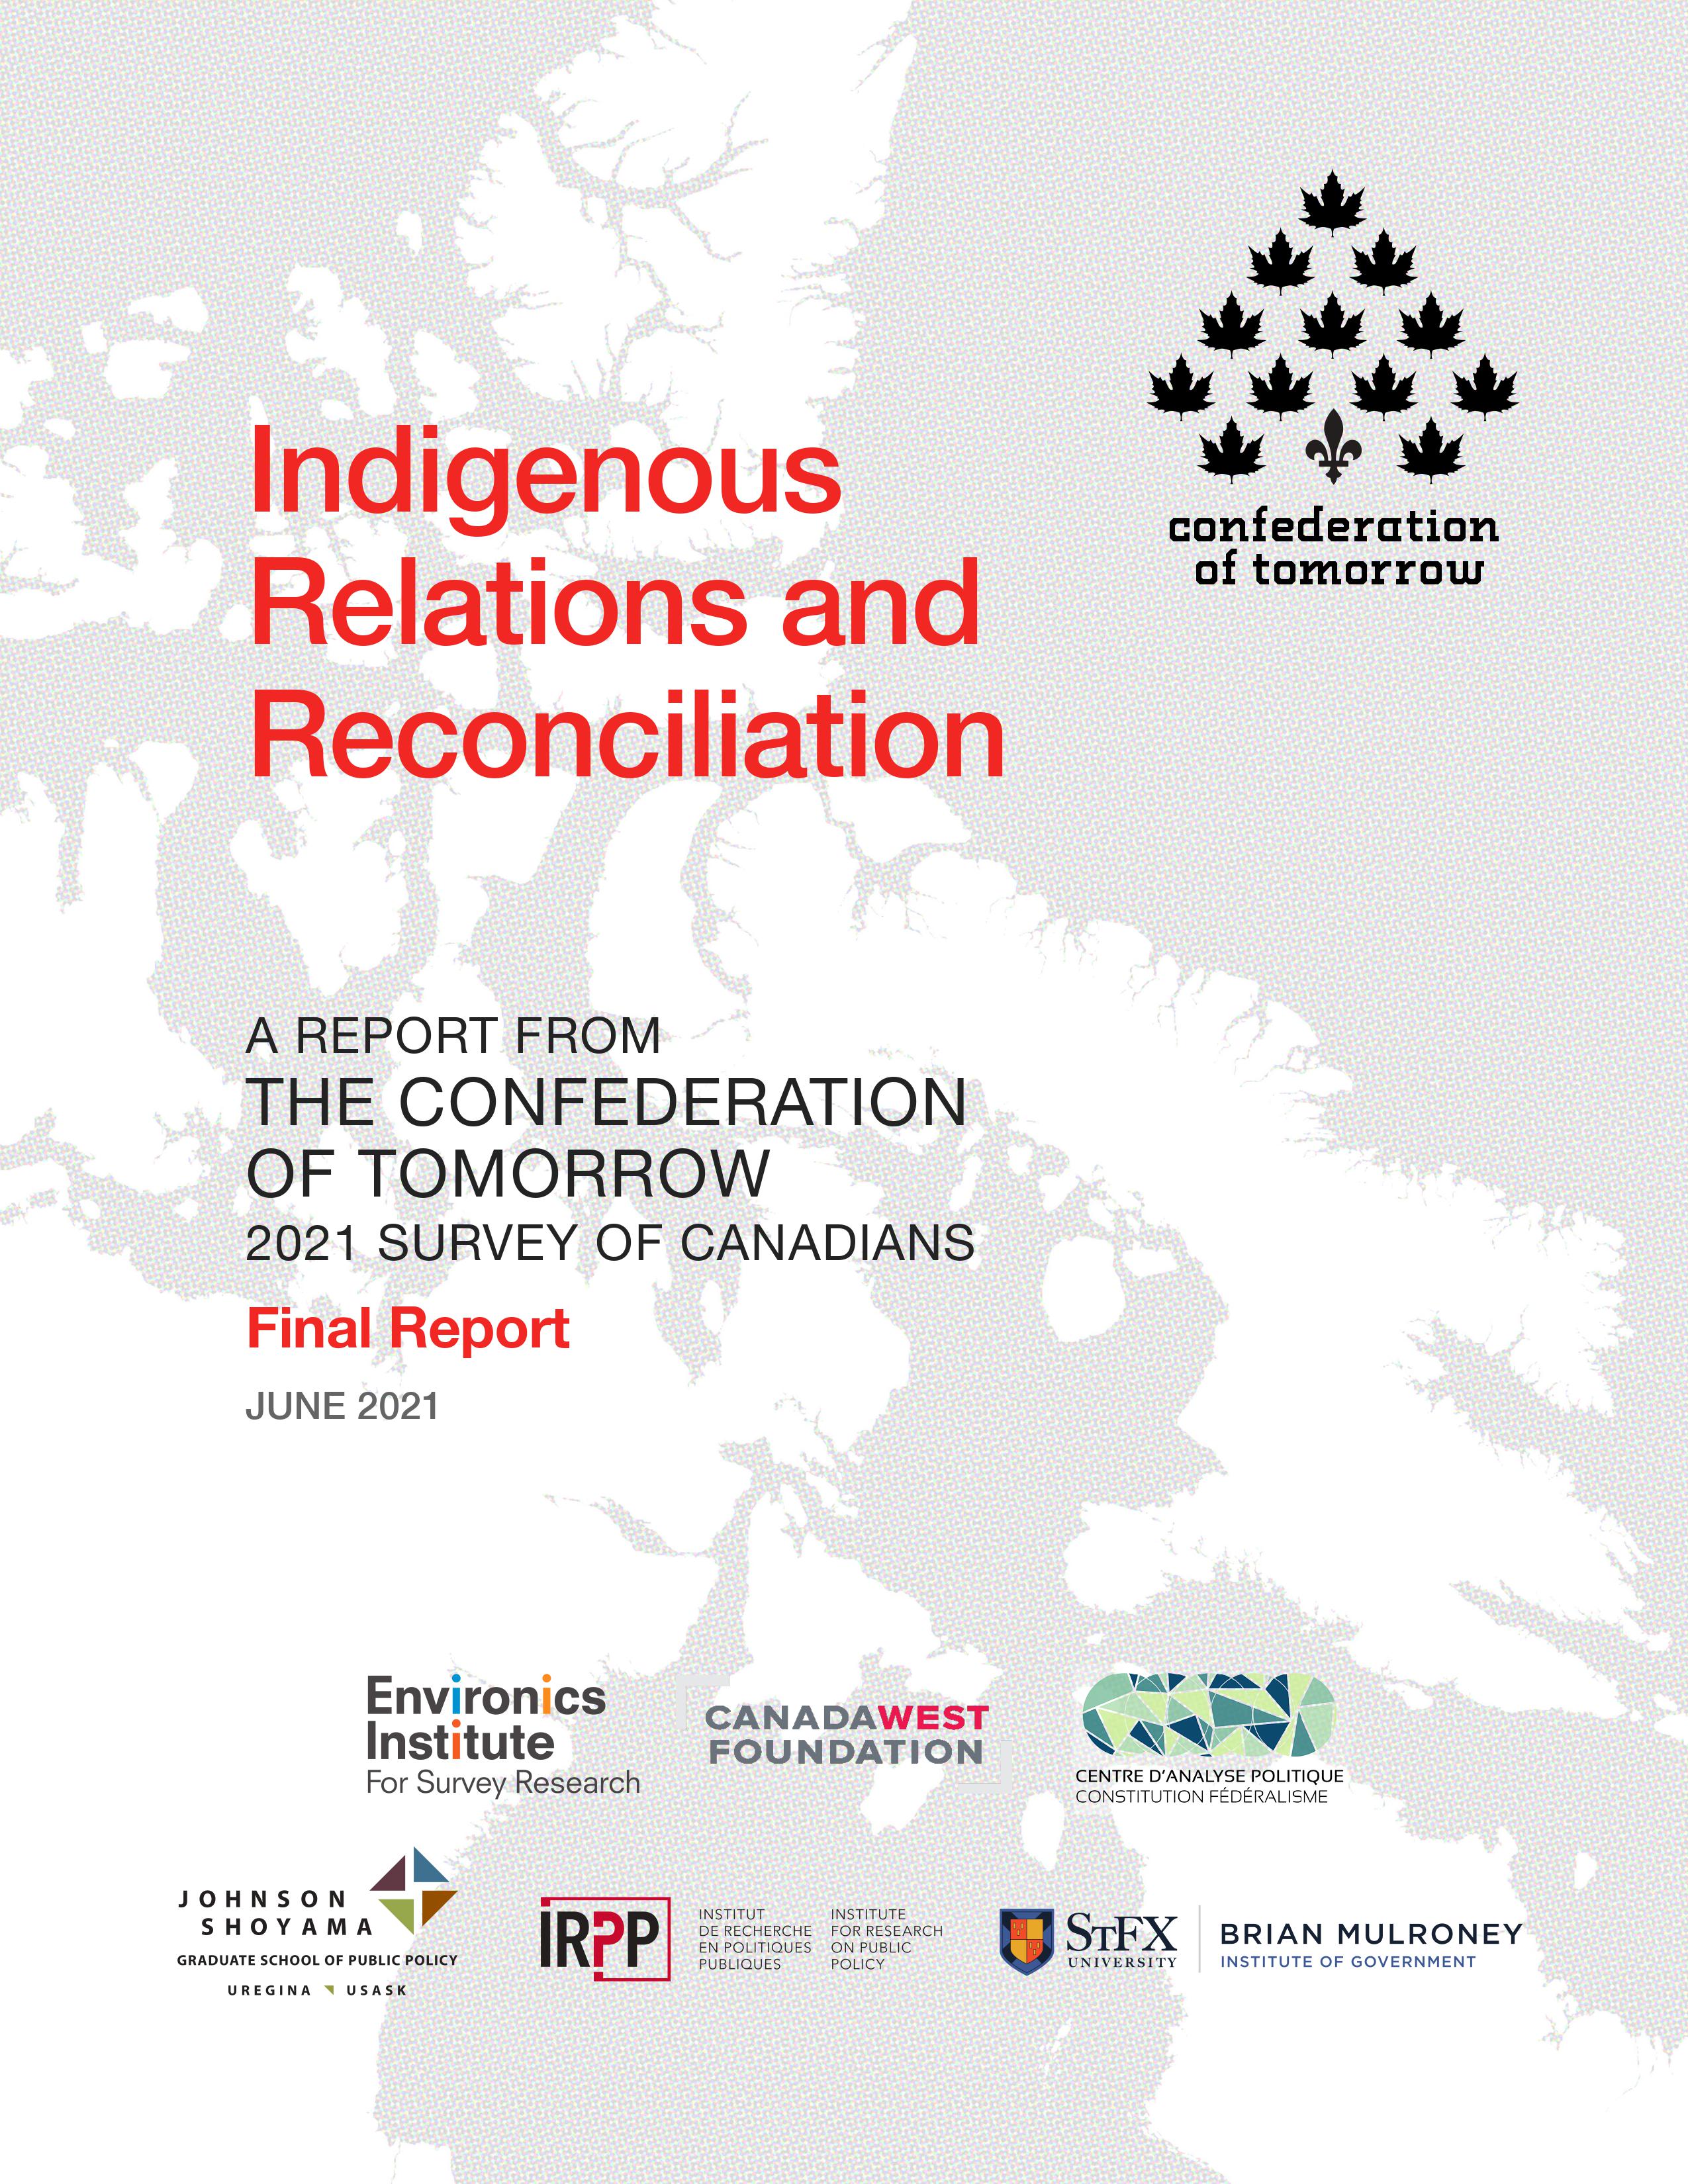 Indigenous Relations and Reconciliation